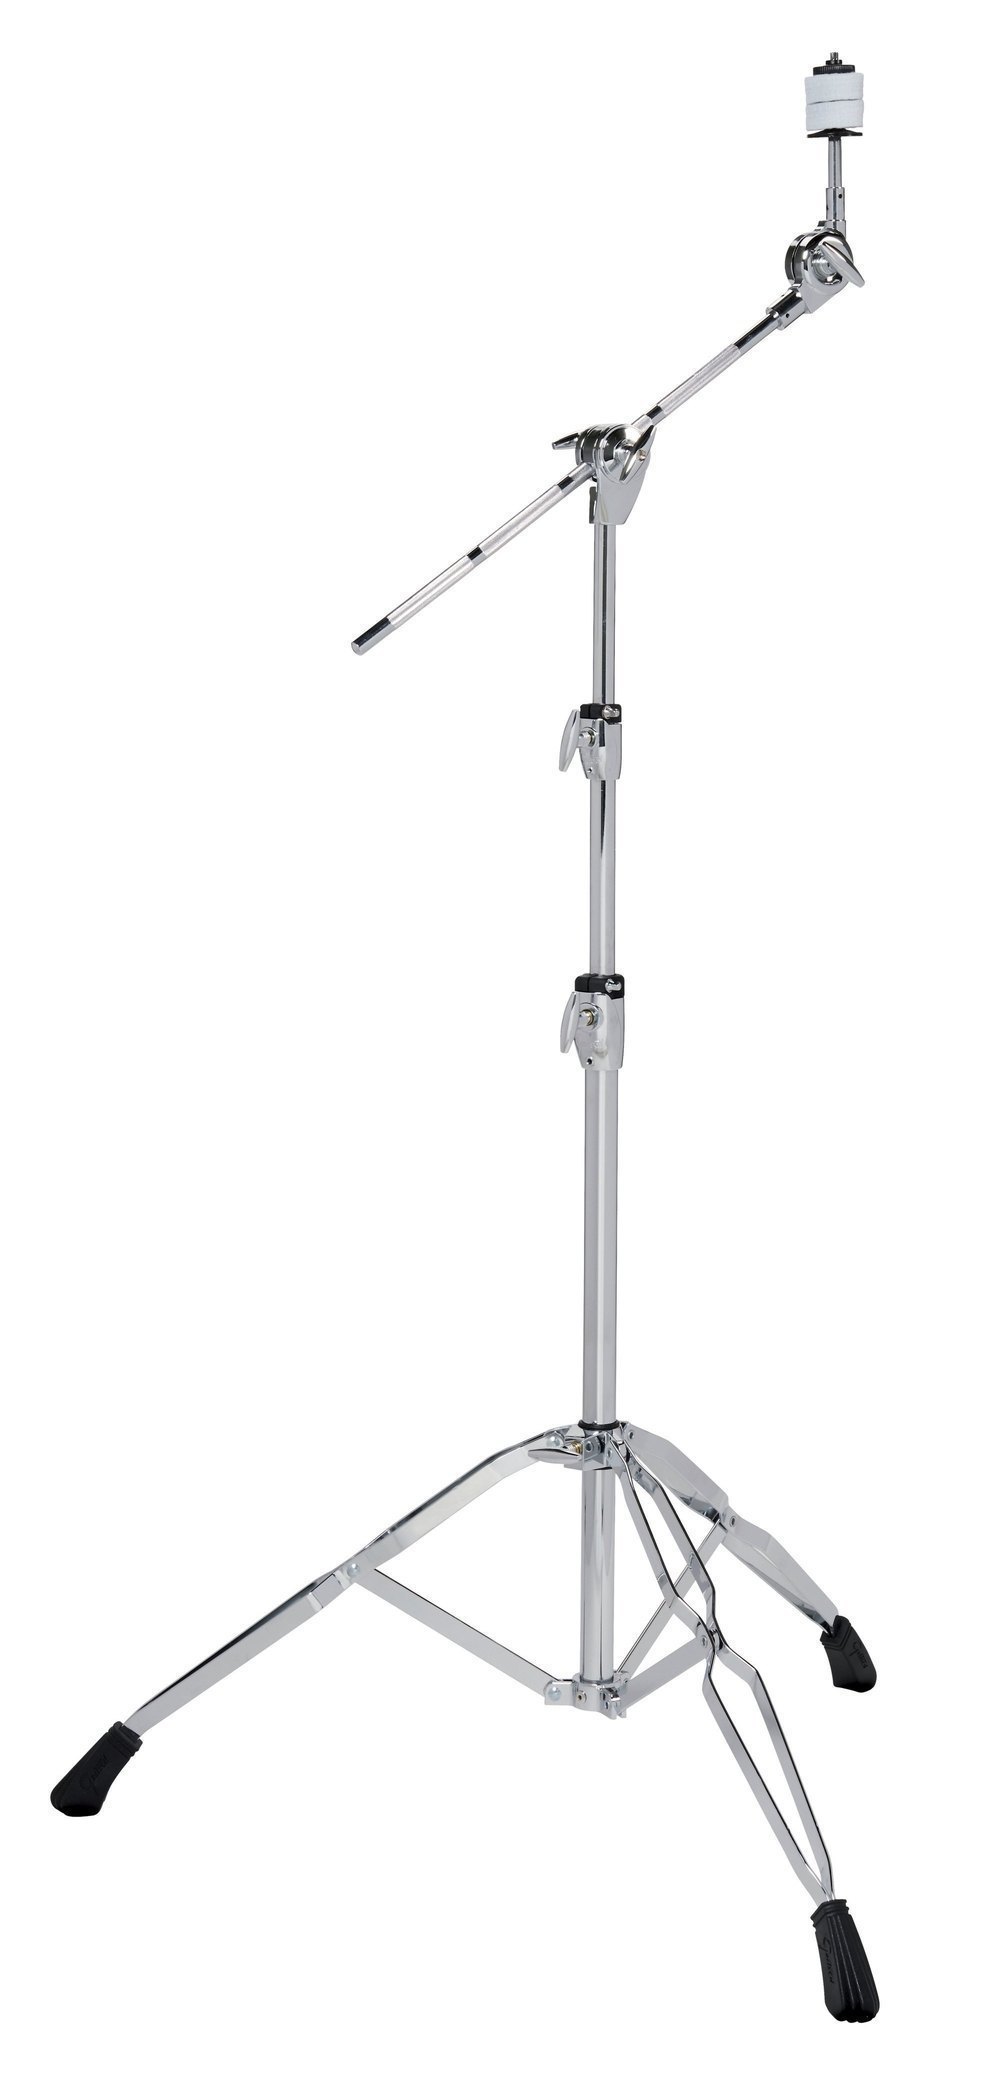 Gretsch Hardware G3 Series cymbal boom stands